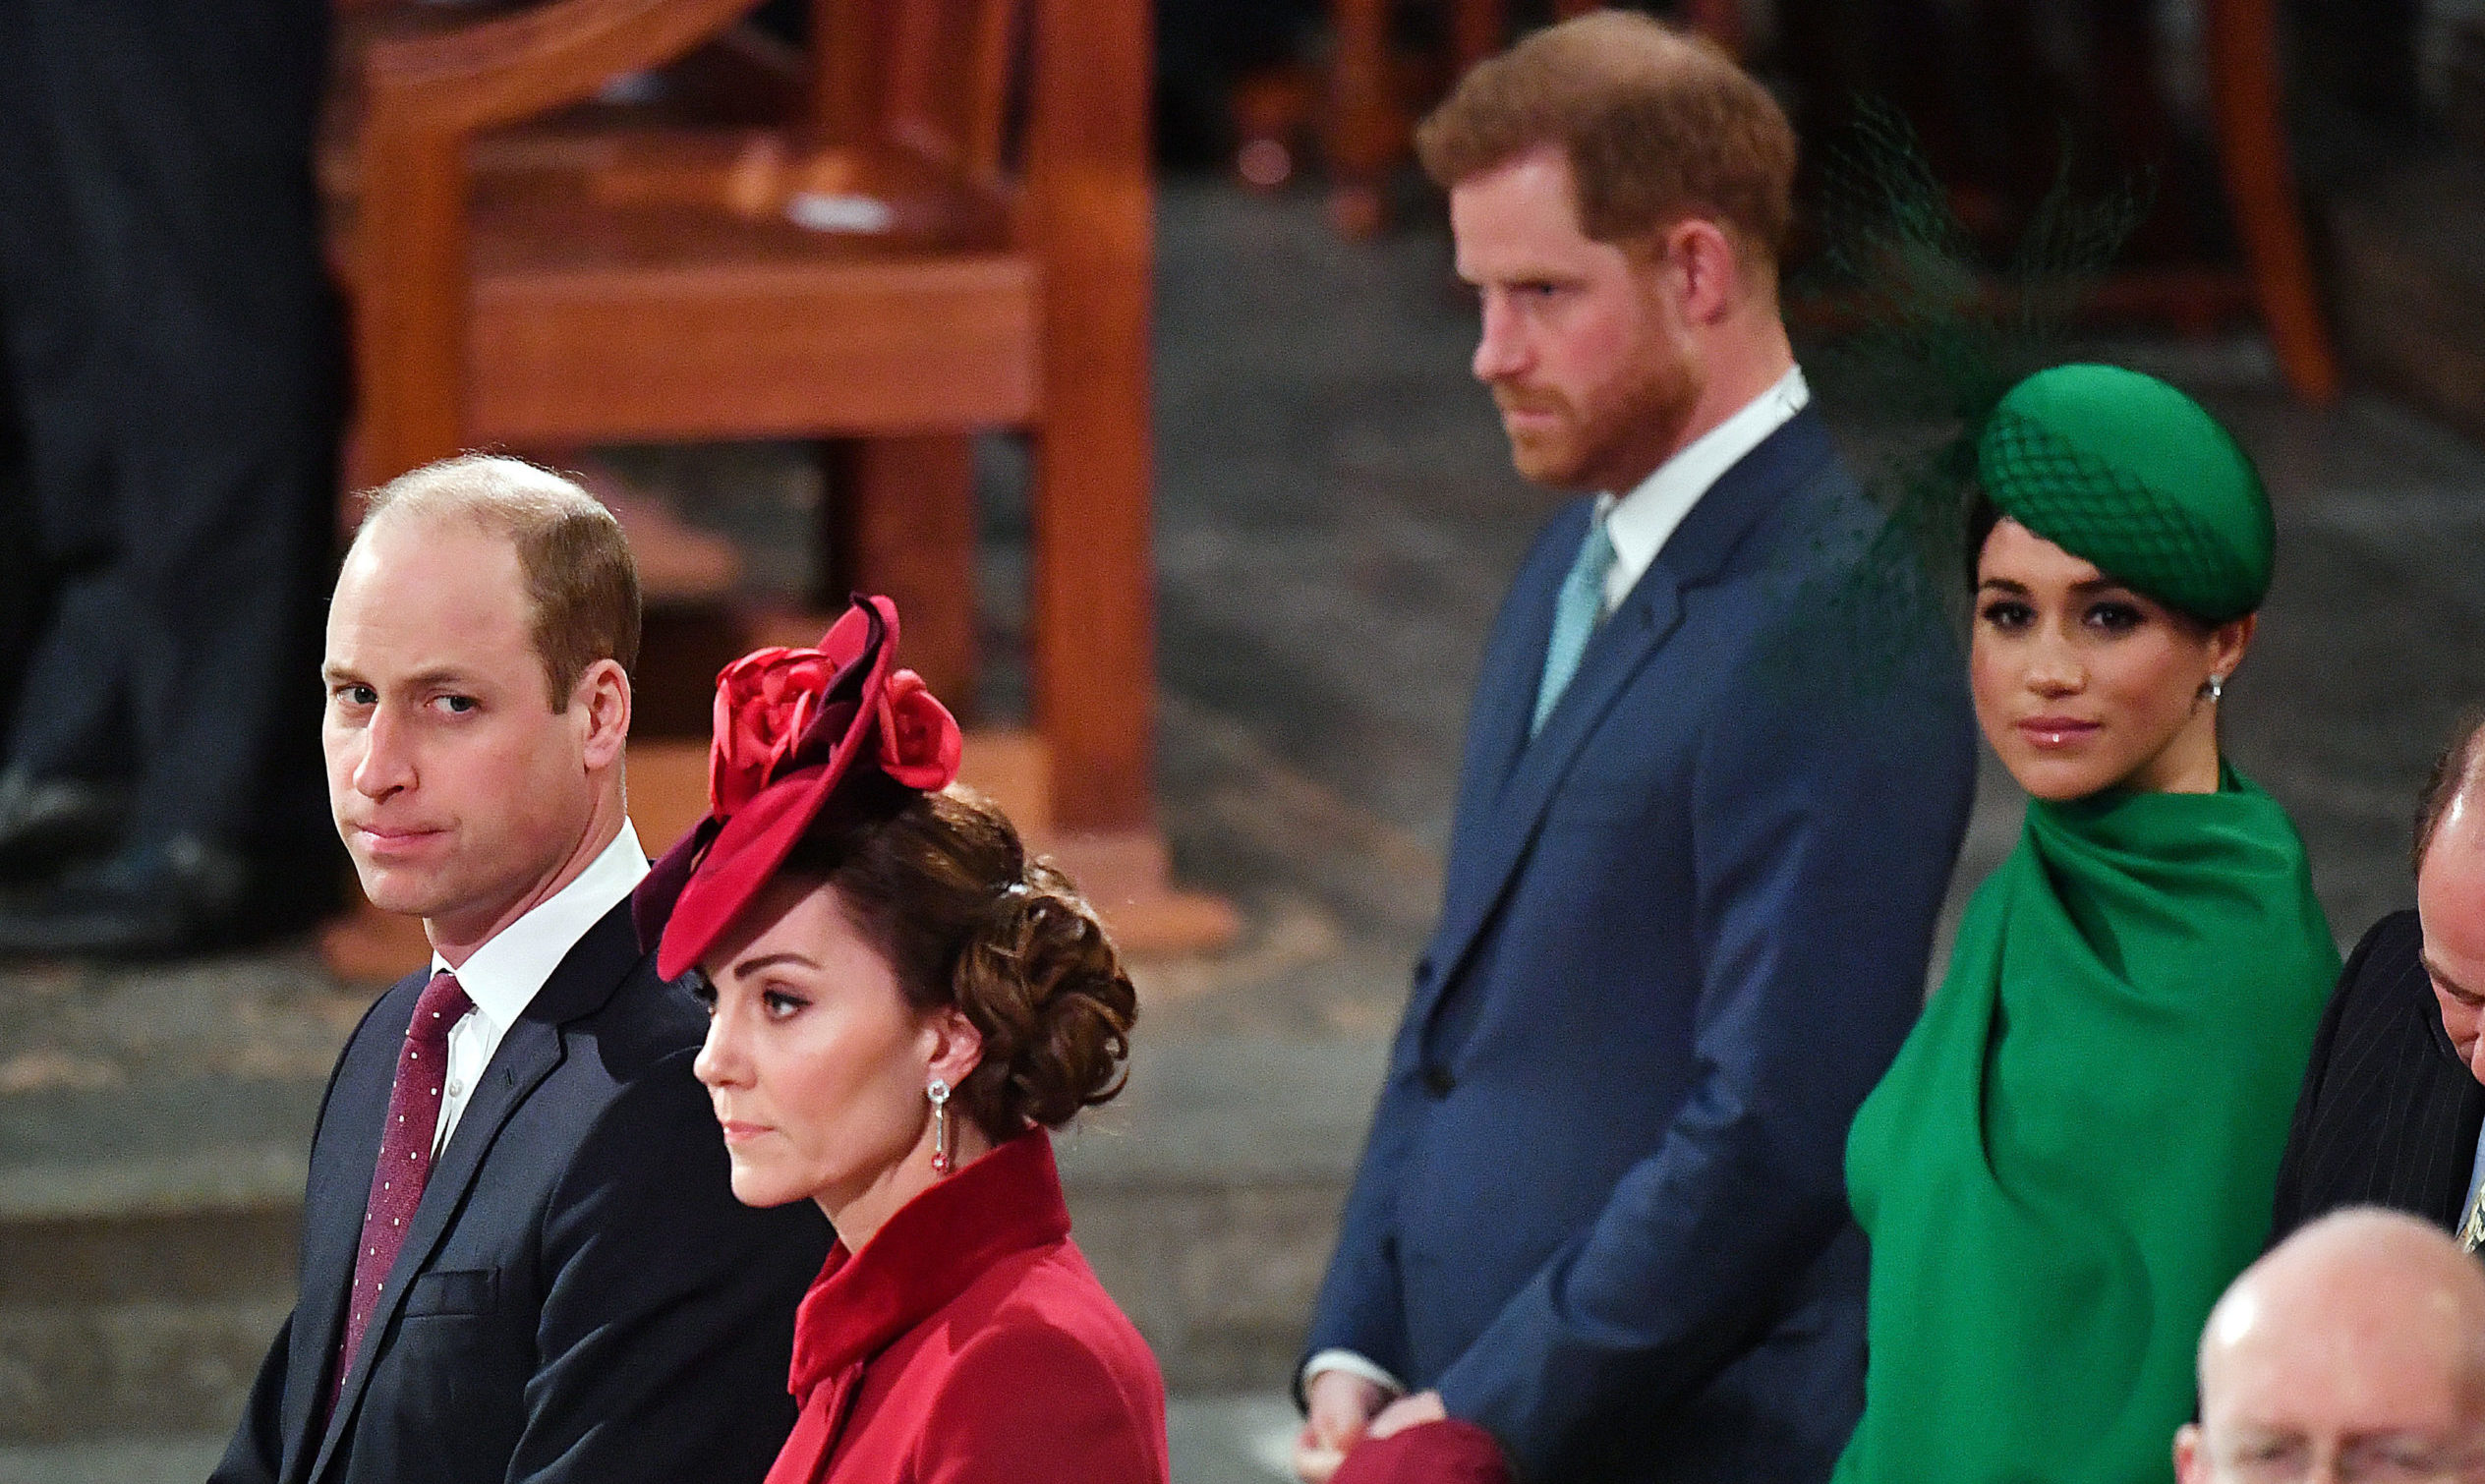 Commonwealth service: The Sussexes and Cambridges barely spoken says book